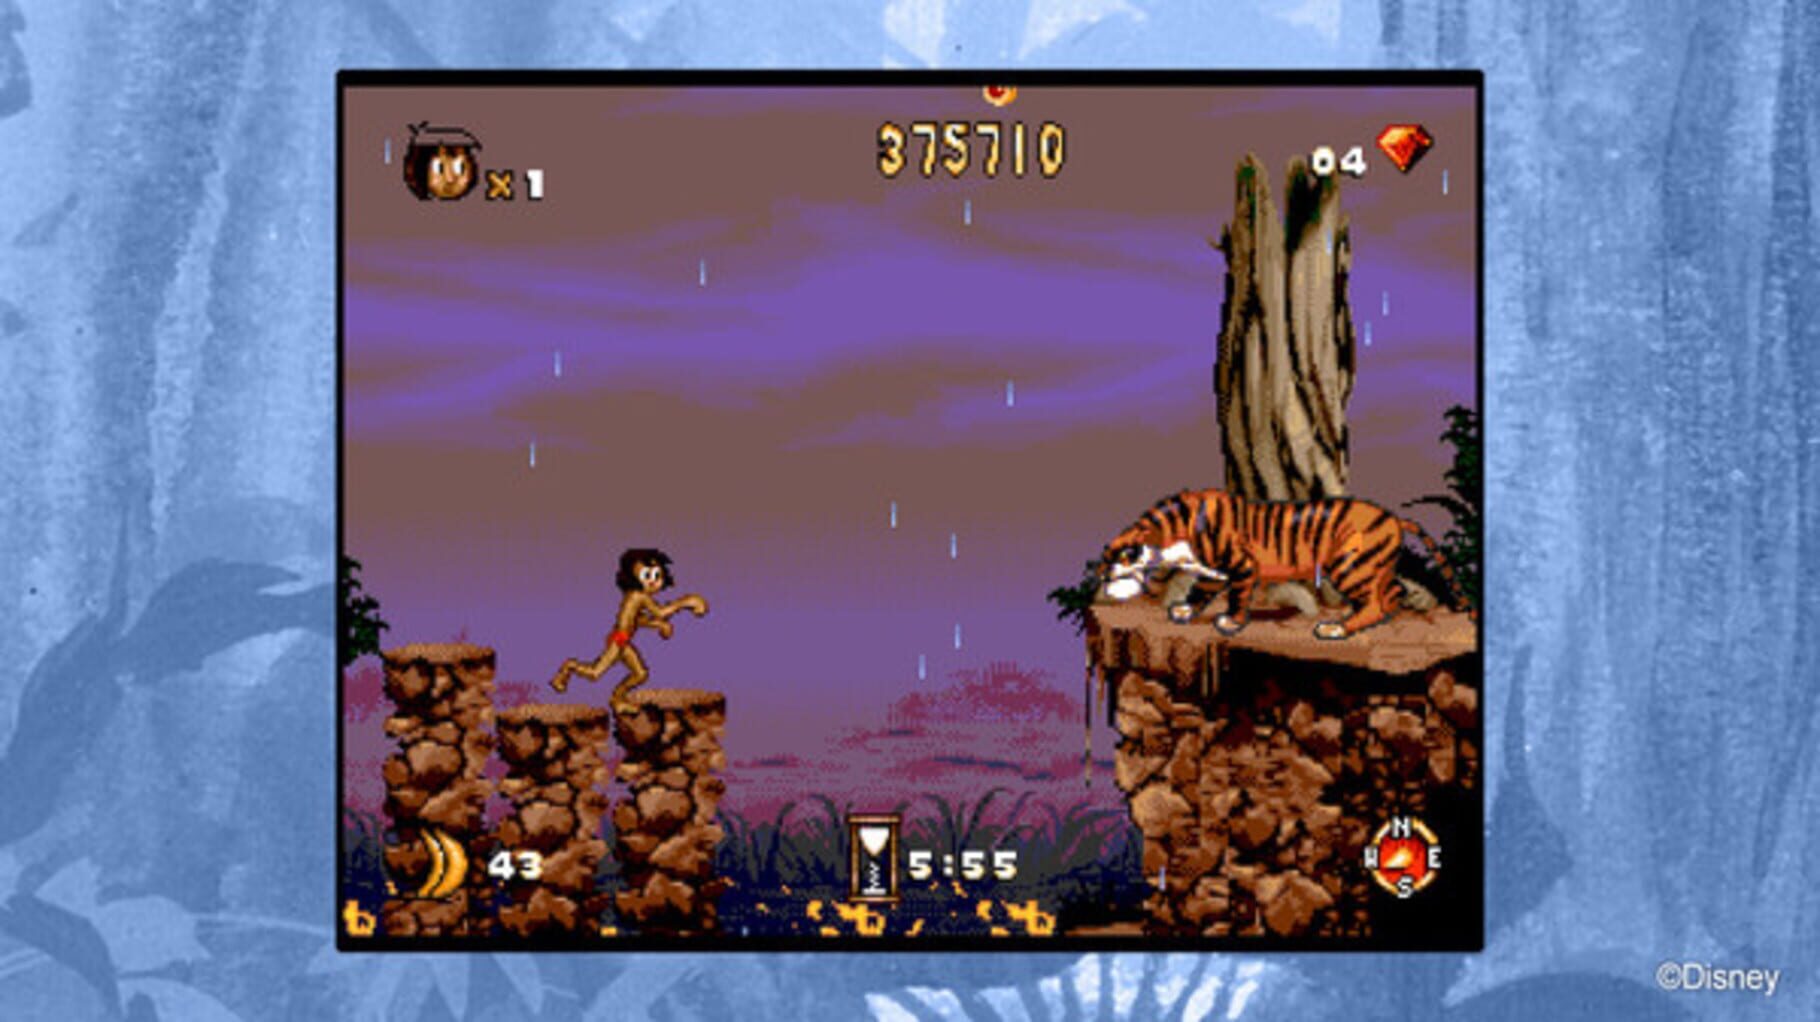 Disney Classic Games: Aladdin and The Lion King - The Jungle Book and More Aladdin Pack Image